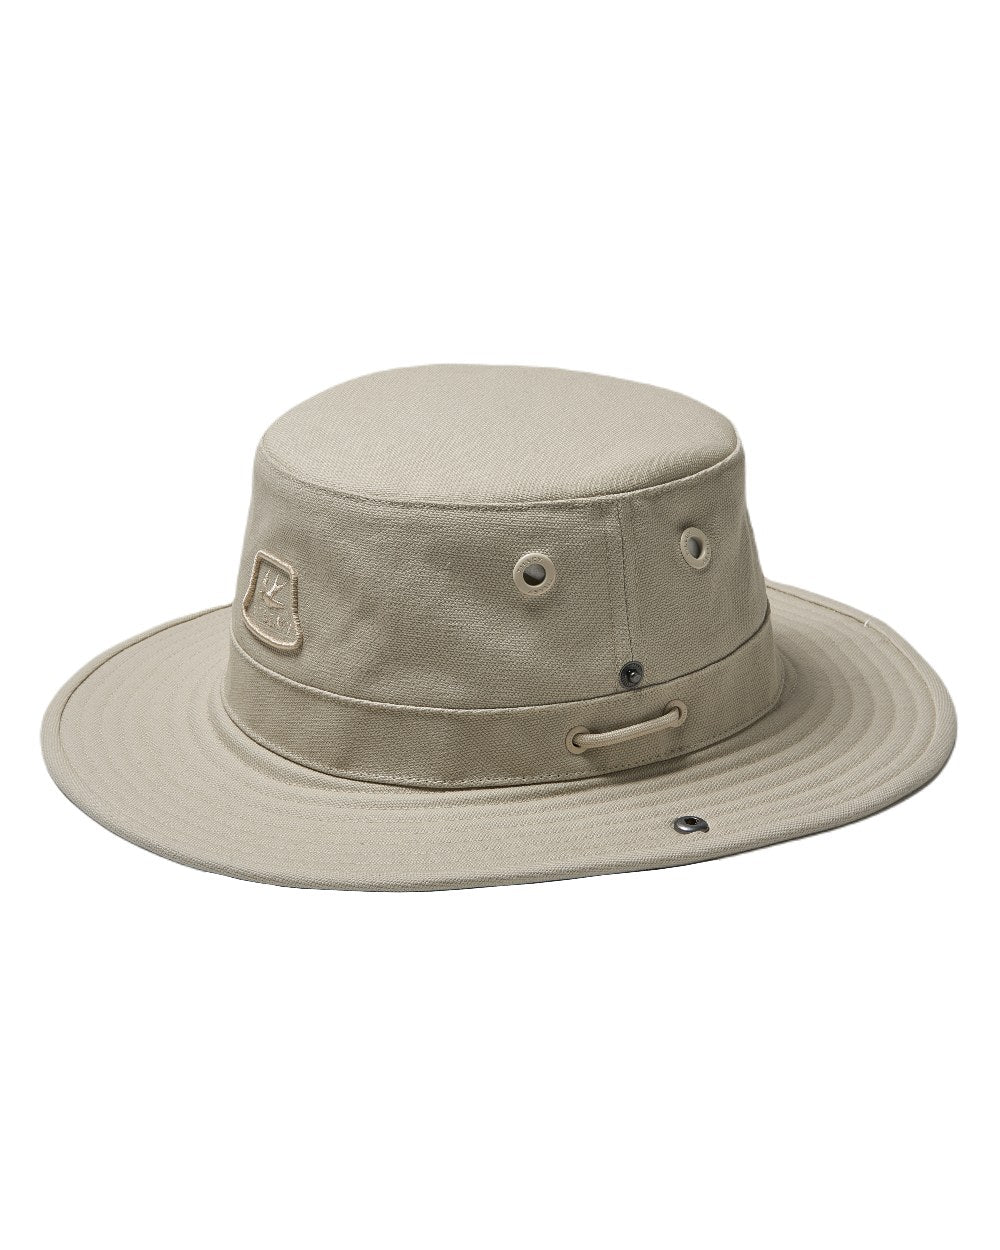 Stone Coloured Tilley Hat Sahara T3 On A White Background 